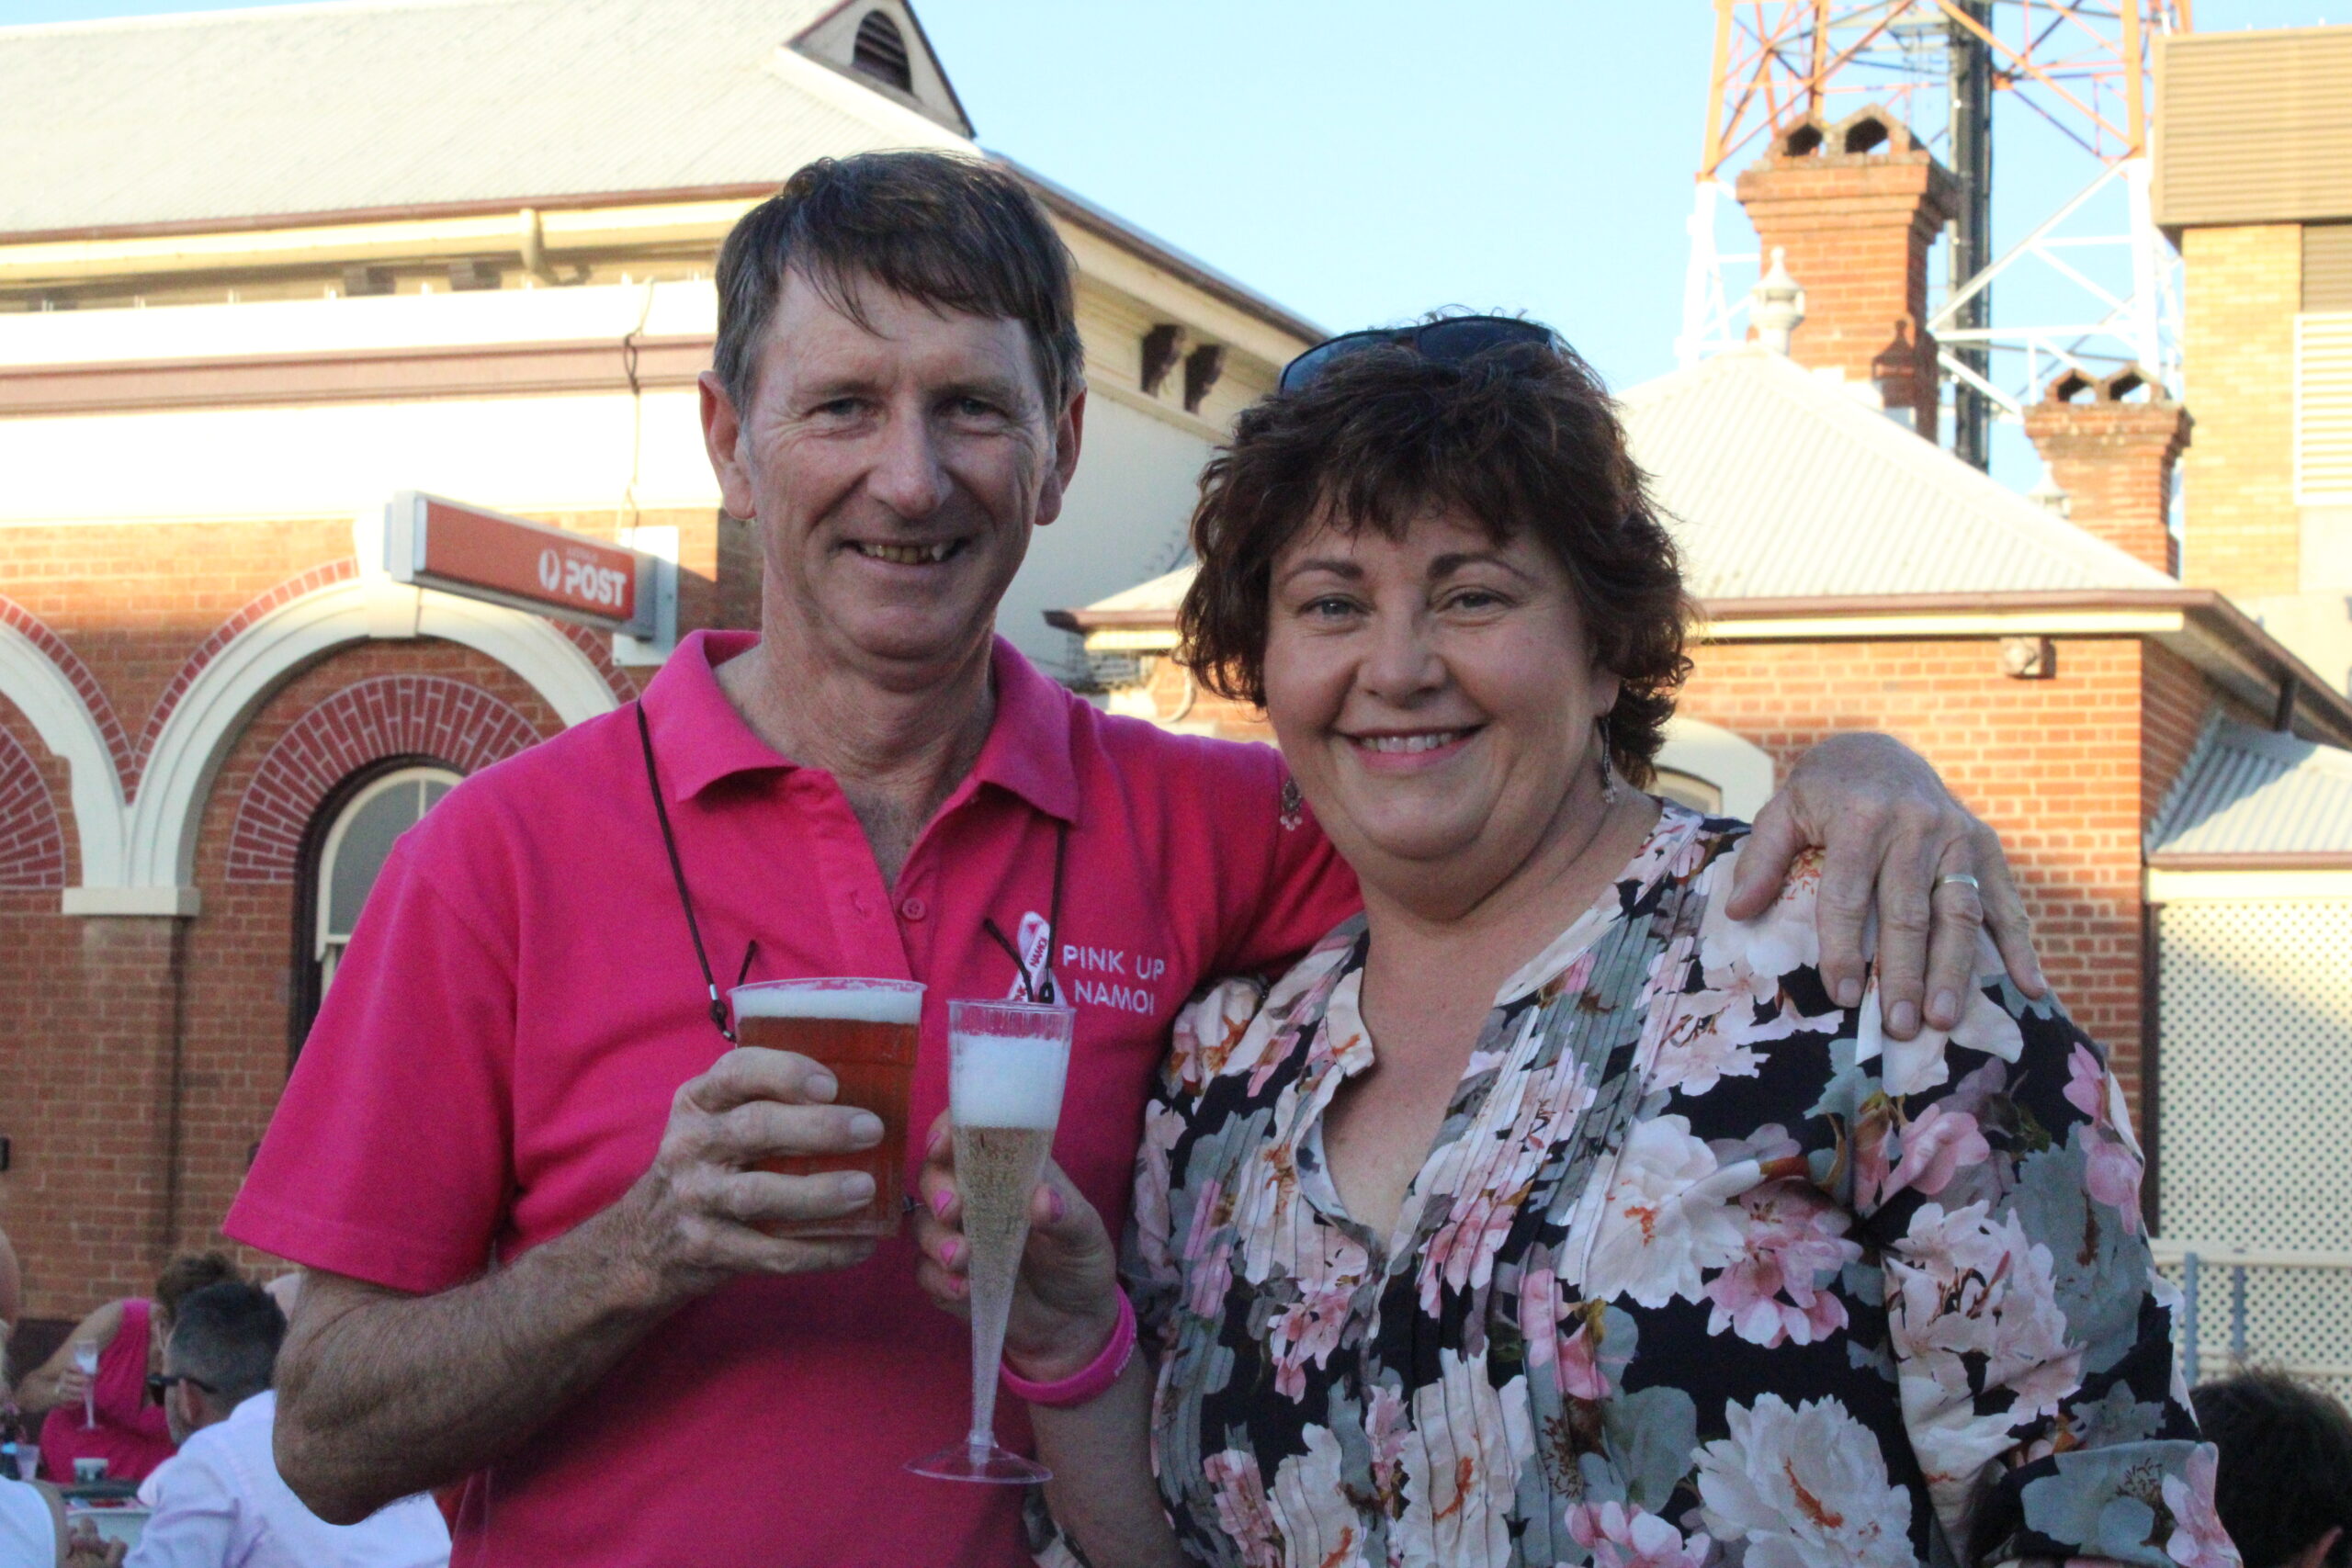 Grahame and Julie Herbert were among the Rotary Club of Narrabri’s contingent who support the Pink Up celebration.